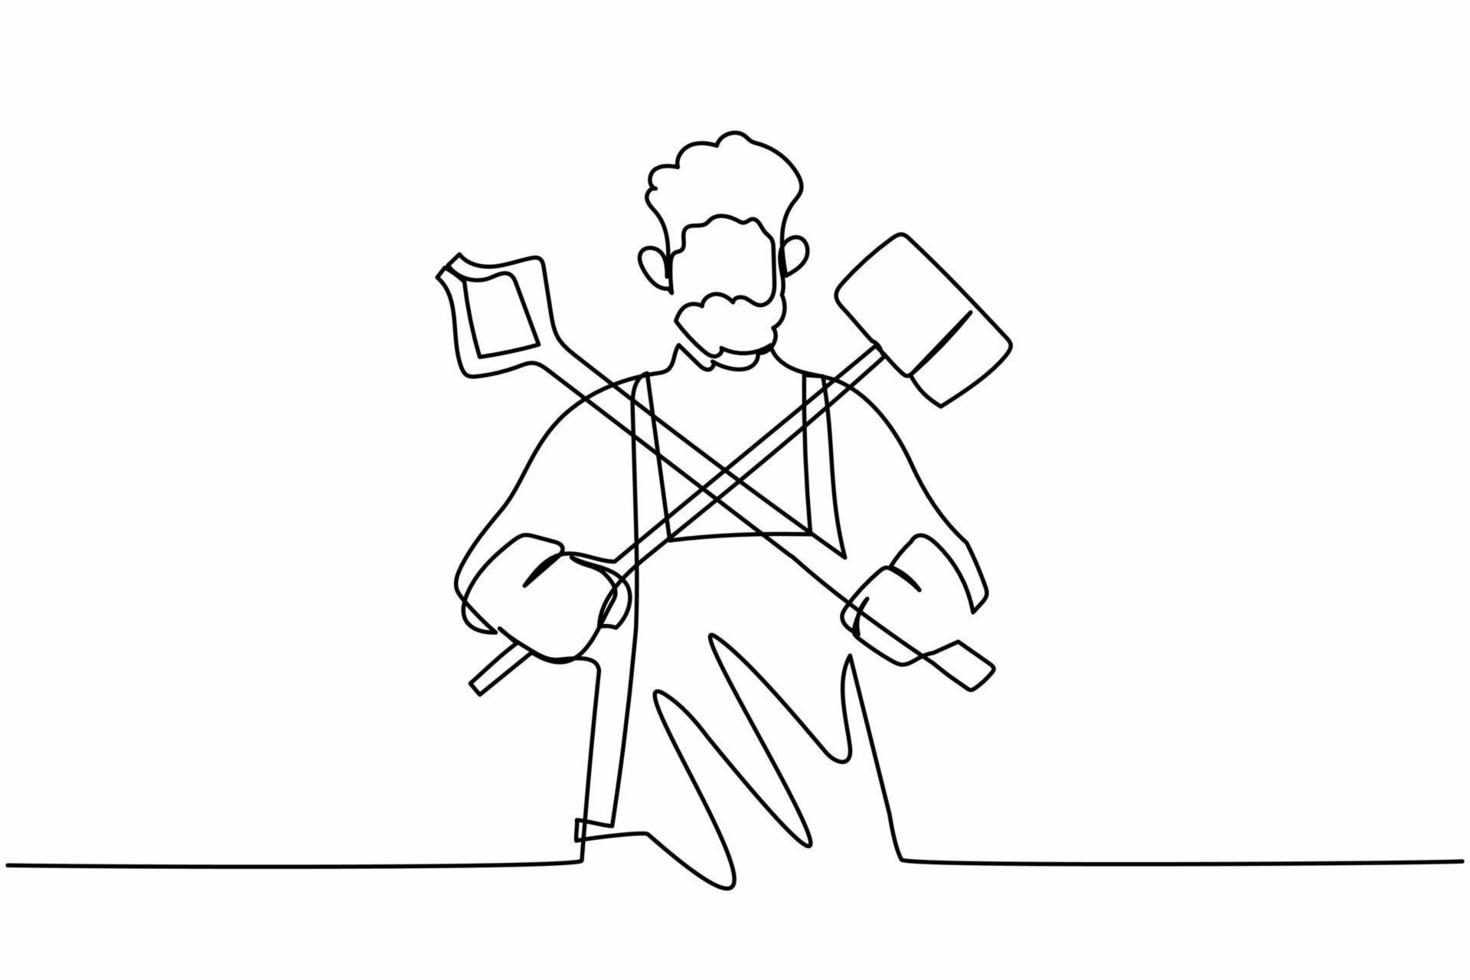 Single continuous line drawing bearded blacksmith standing wearing apron holding sledgehammer and pliers crossed. Worker producing steel craft in workshop. One line graphic design vector illustration